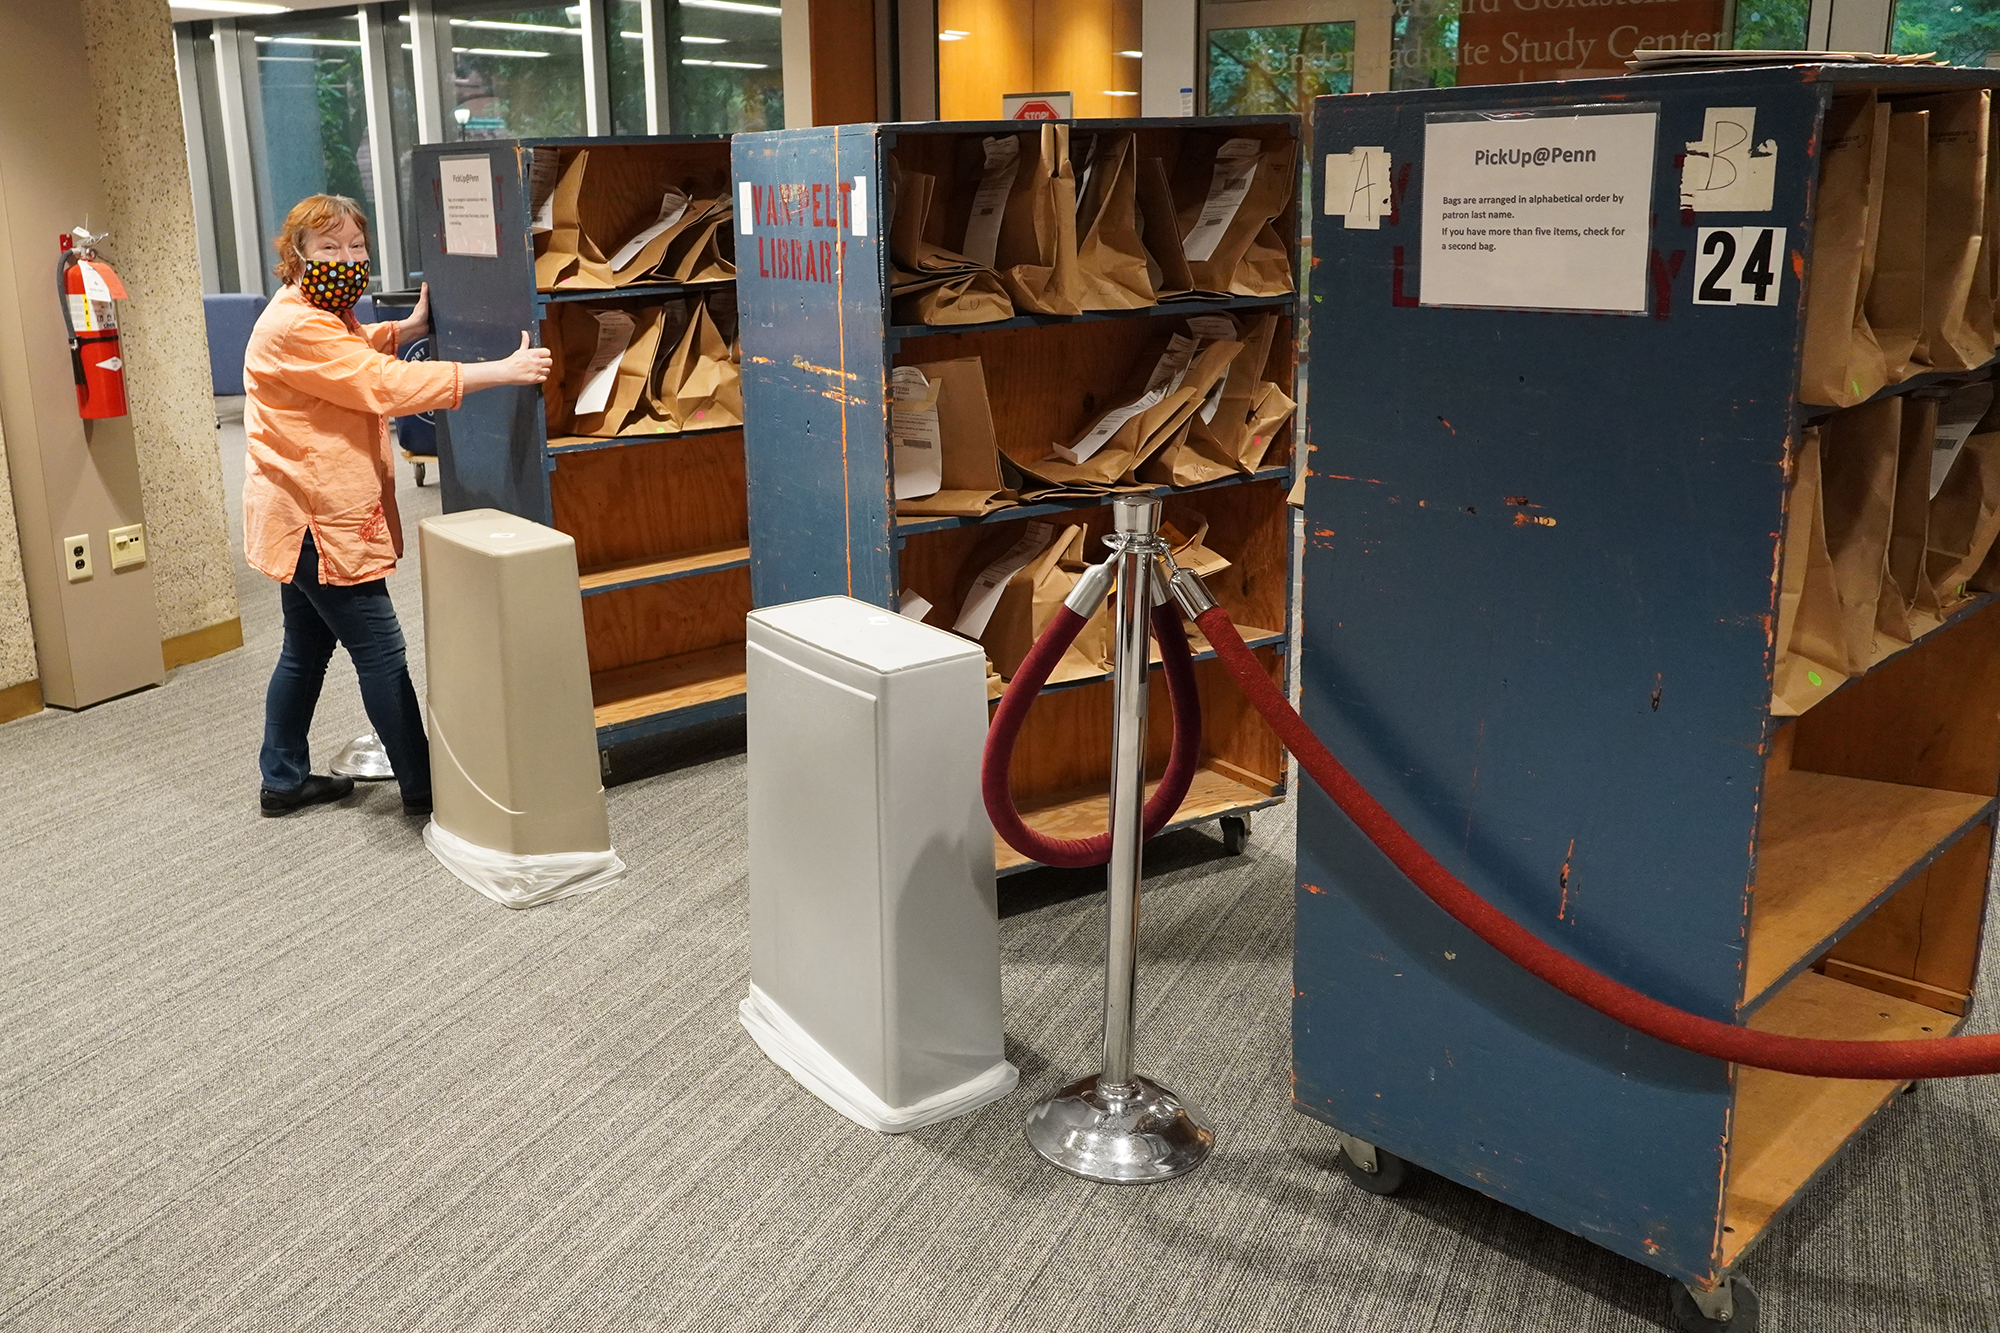 Emily Batista inside the library wearing a face mask stands by a large cart of bookshelves.